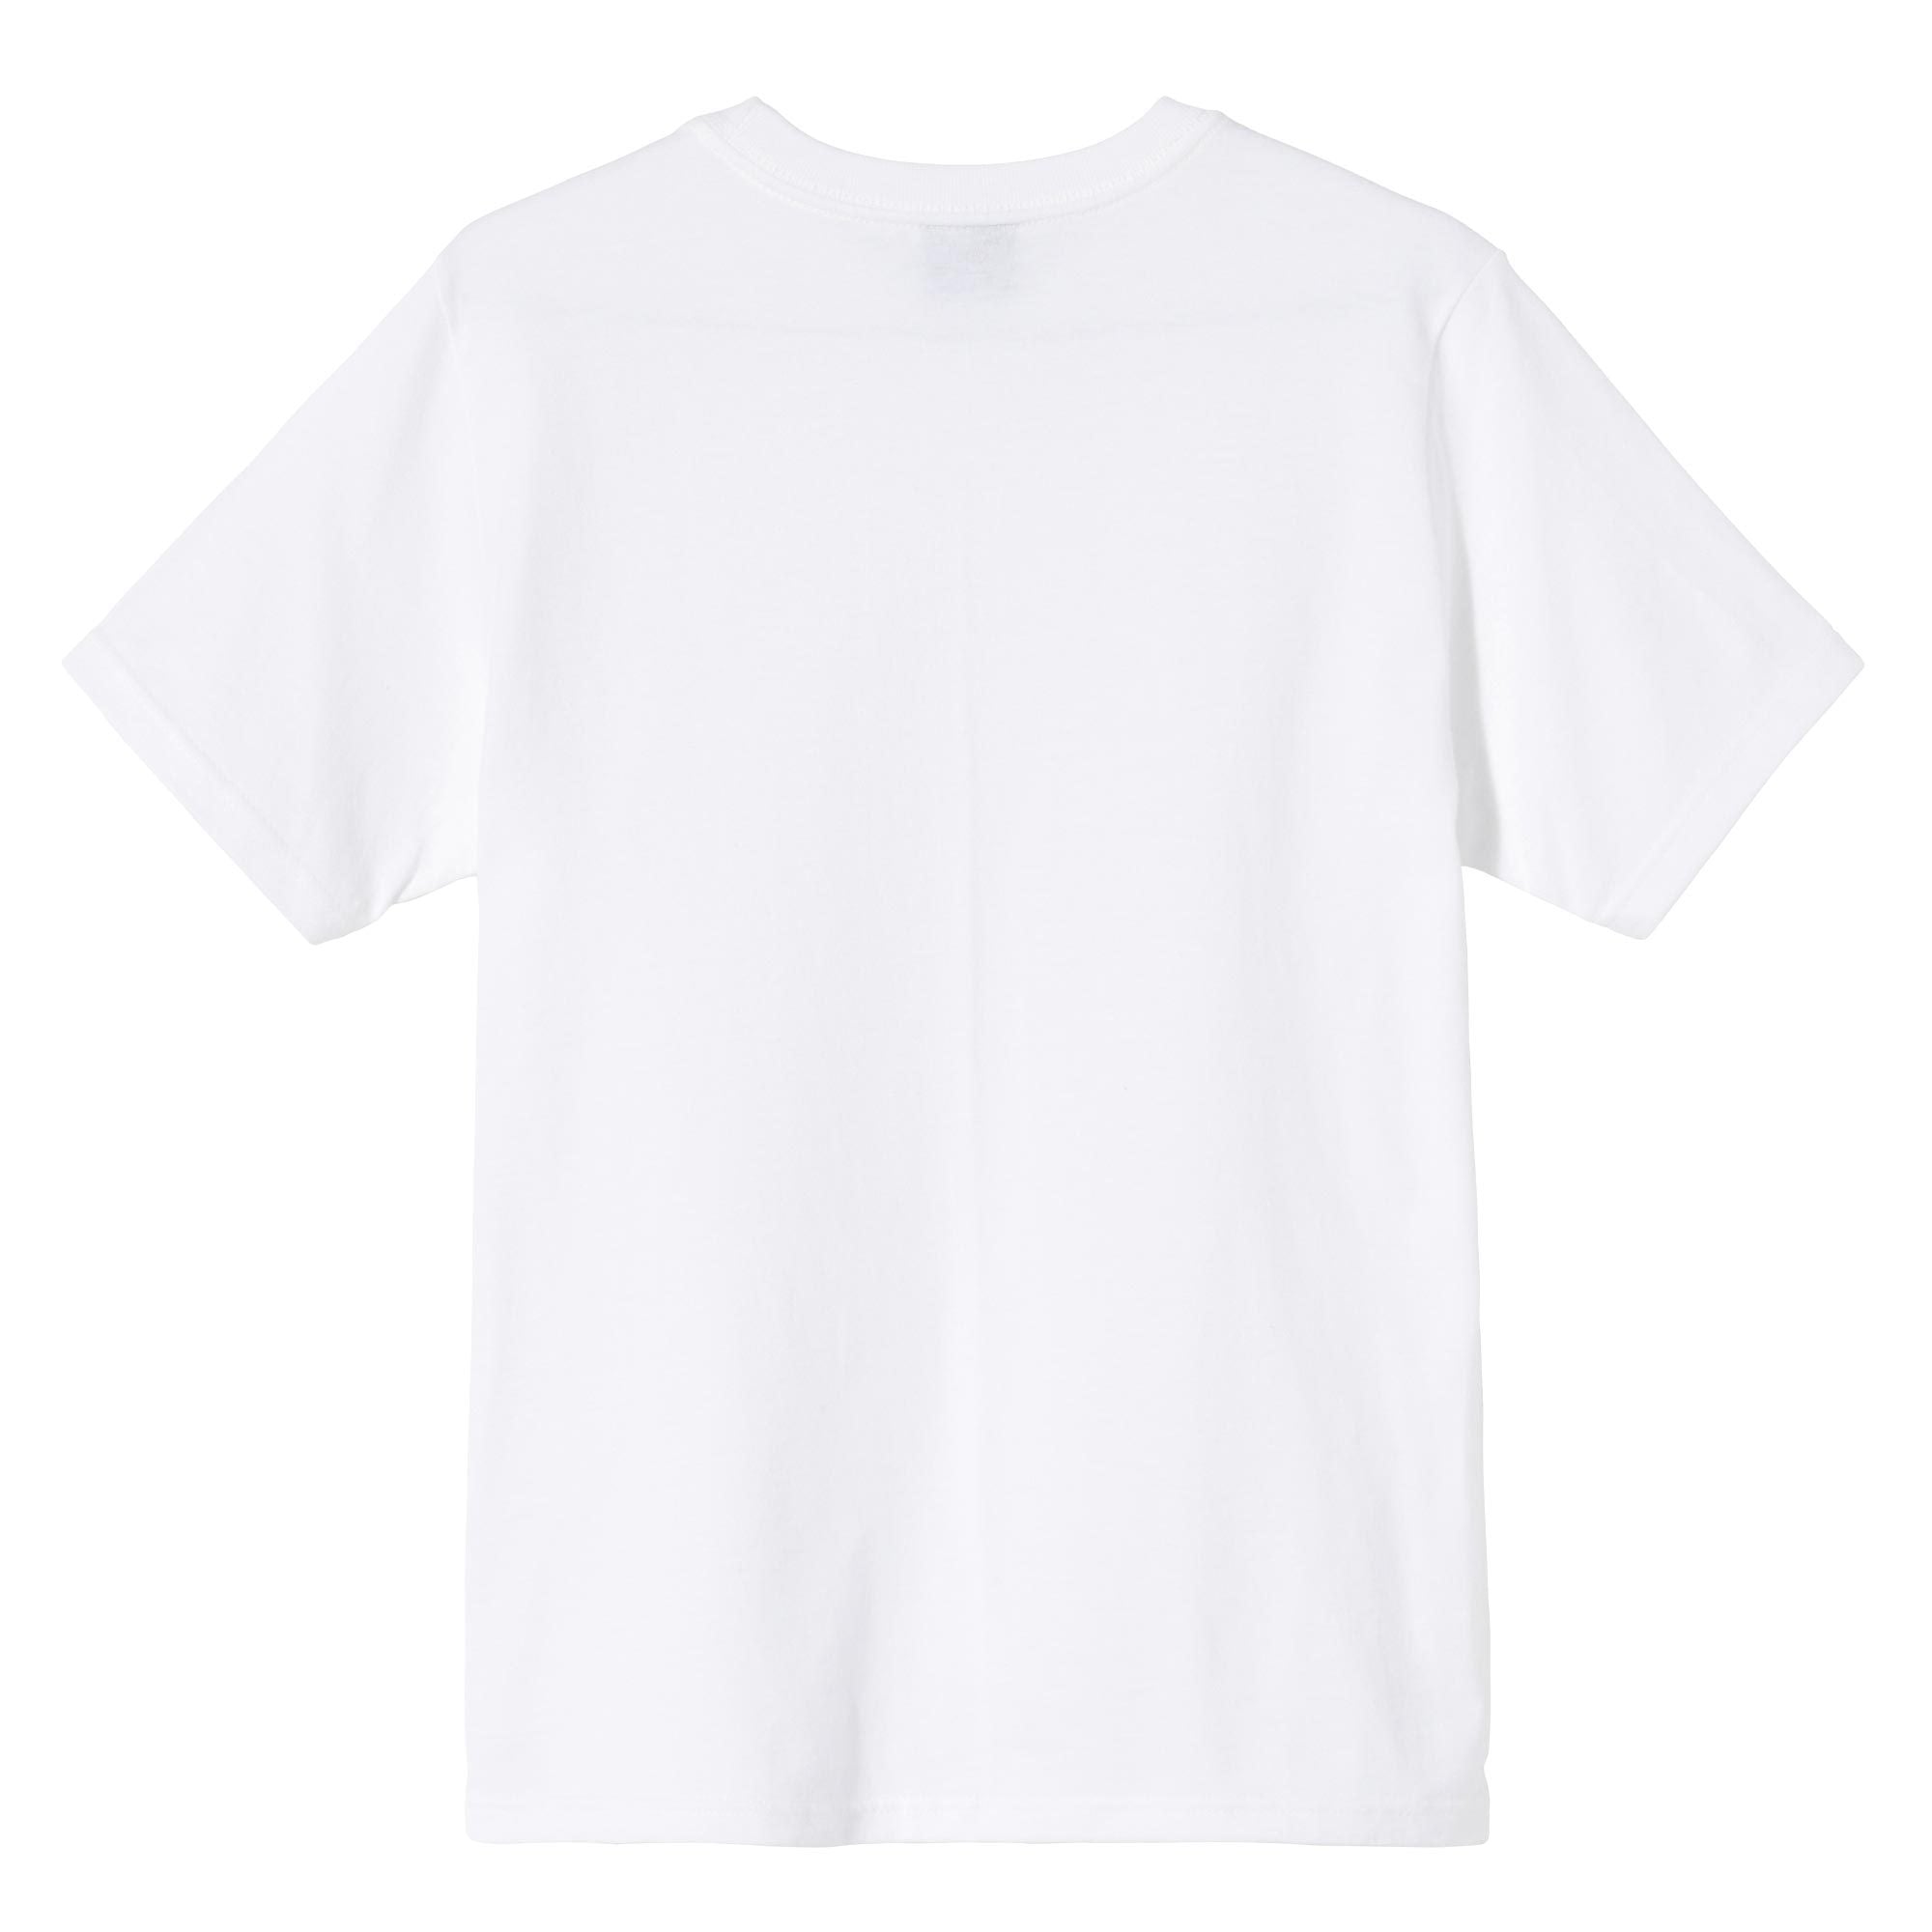 Stussy Paint Can Tee White